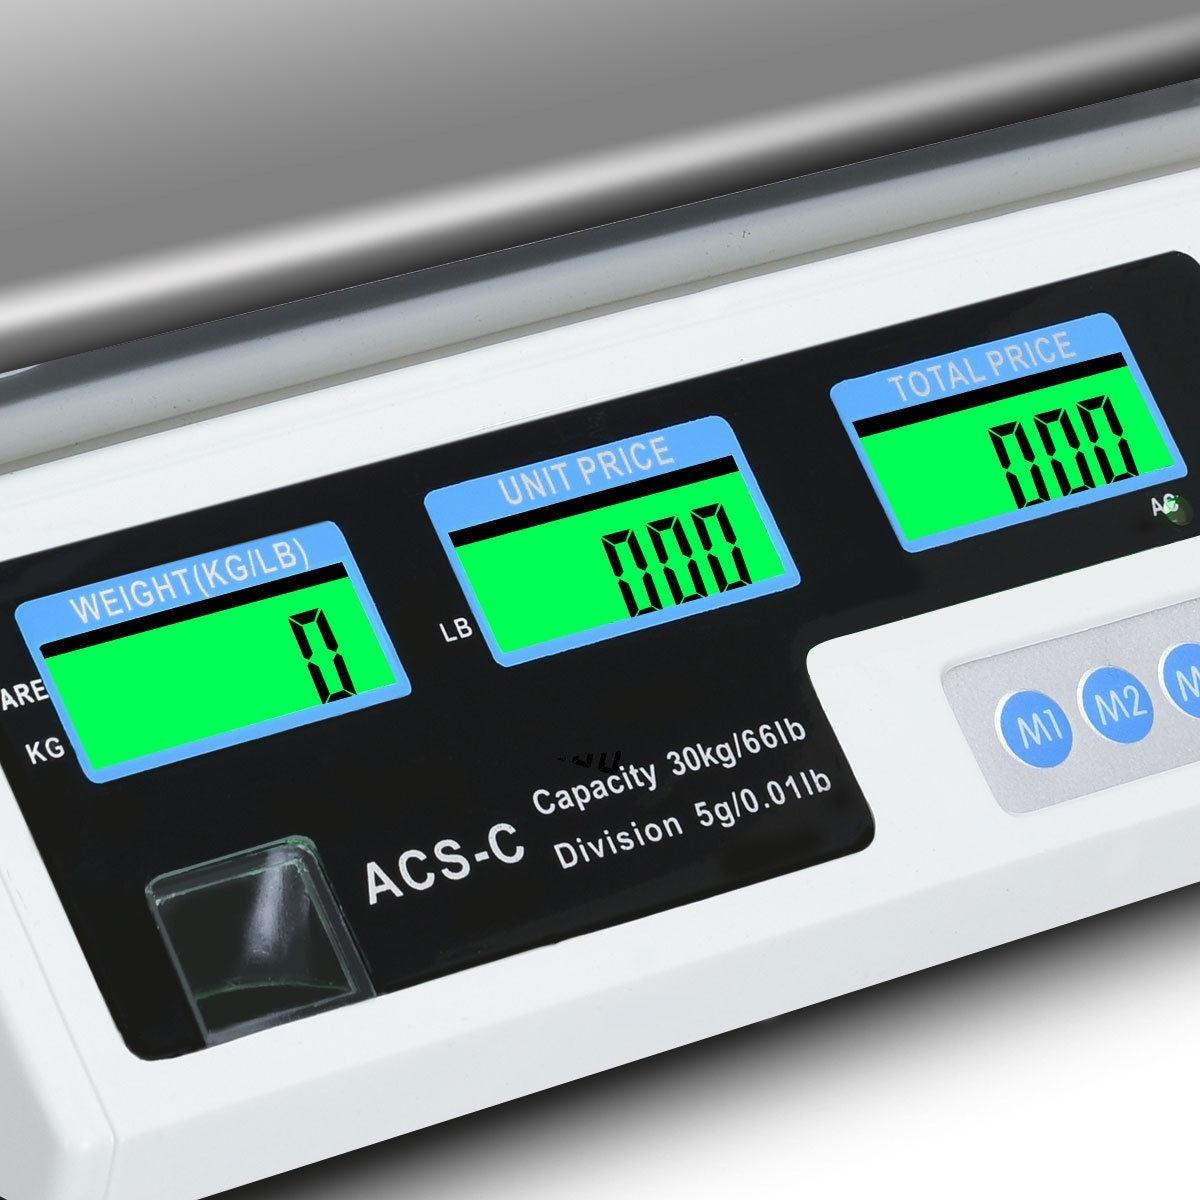 Food Count Scale EP20985-110V,for Commercial 66 lbs Digital Weight - YOURISHOP.COM